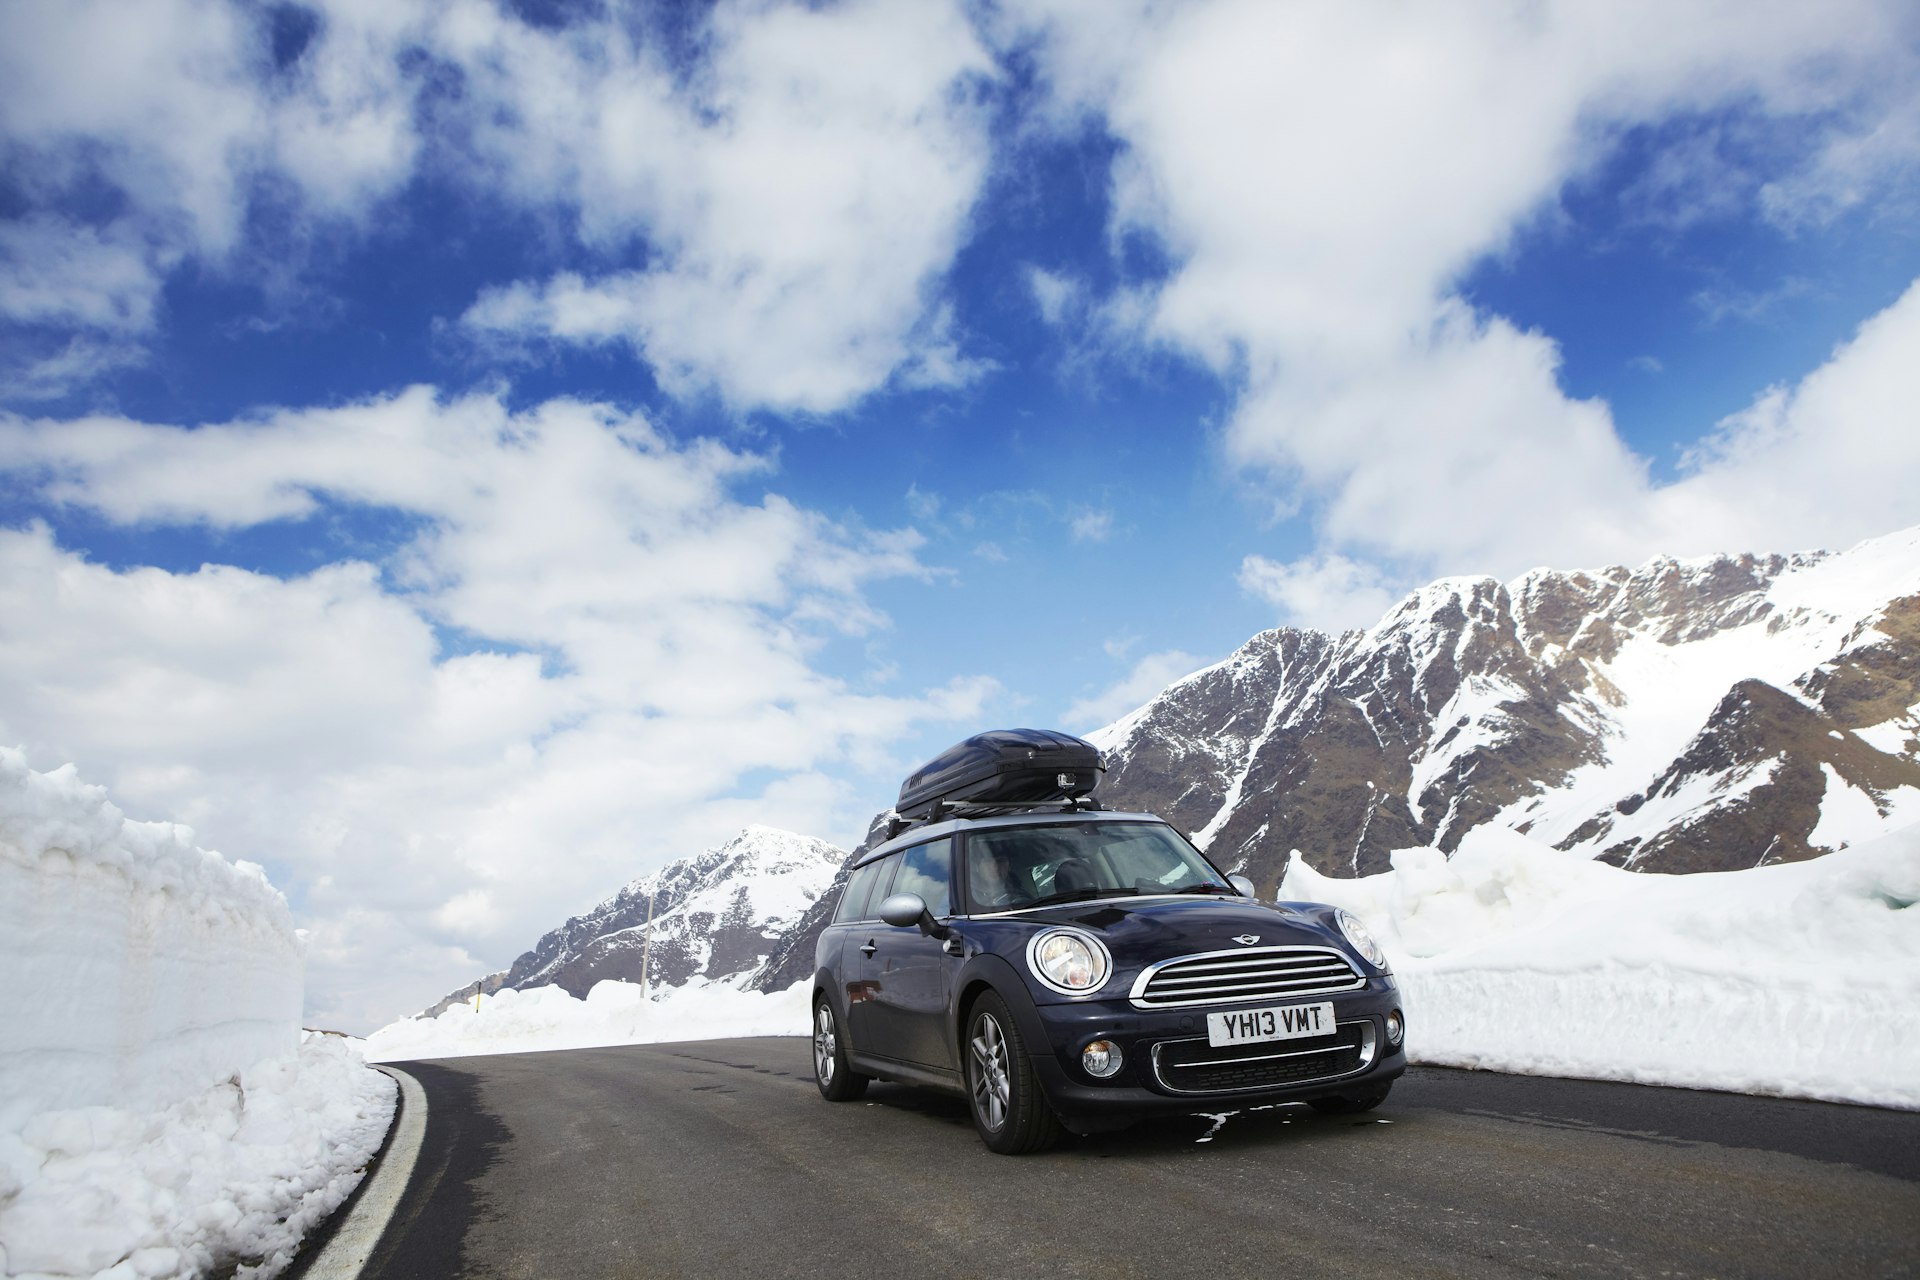 A black Mini drives a mountainous road lined with snow